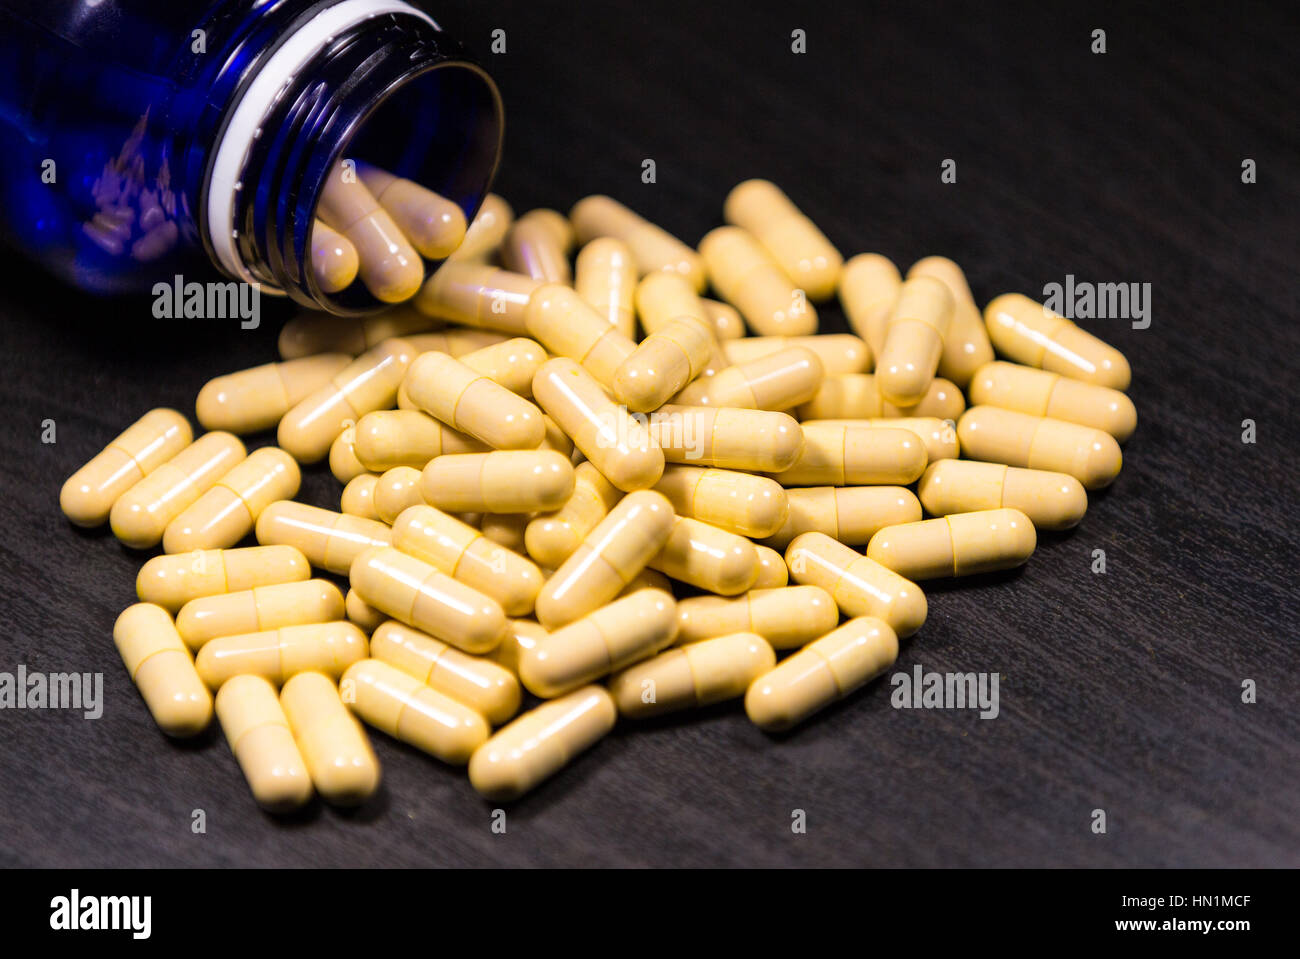 Pill bottle spilling pills on to surface isolated on a black background Stock Photo